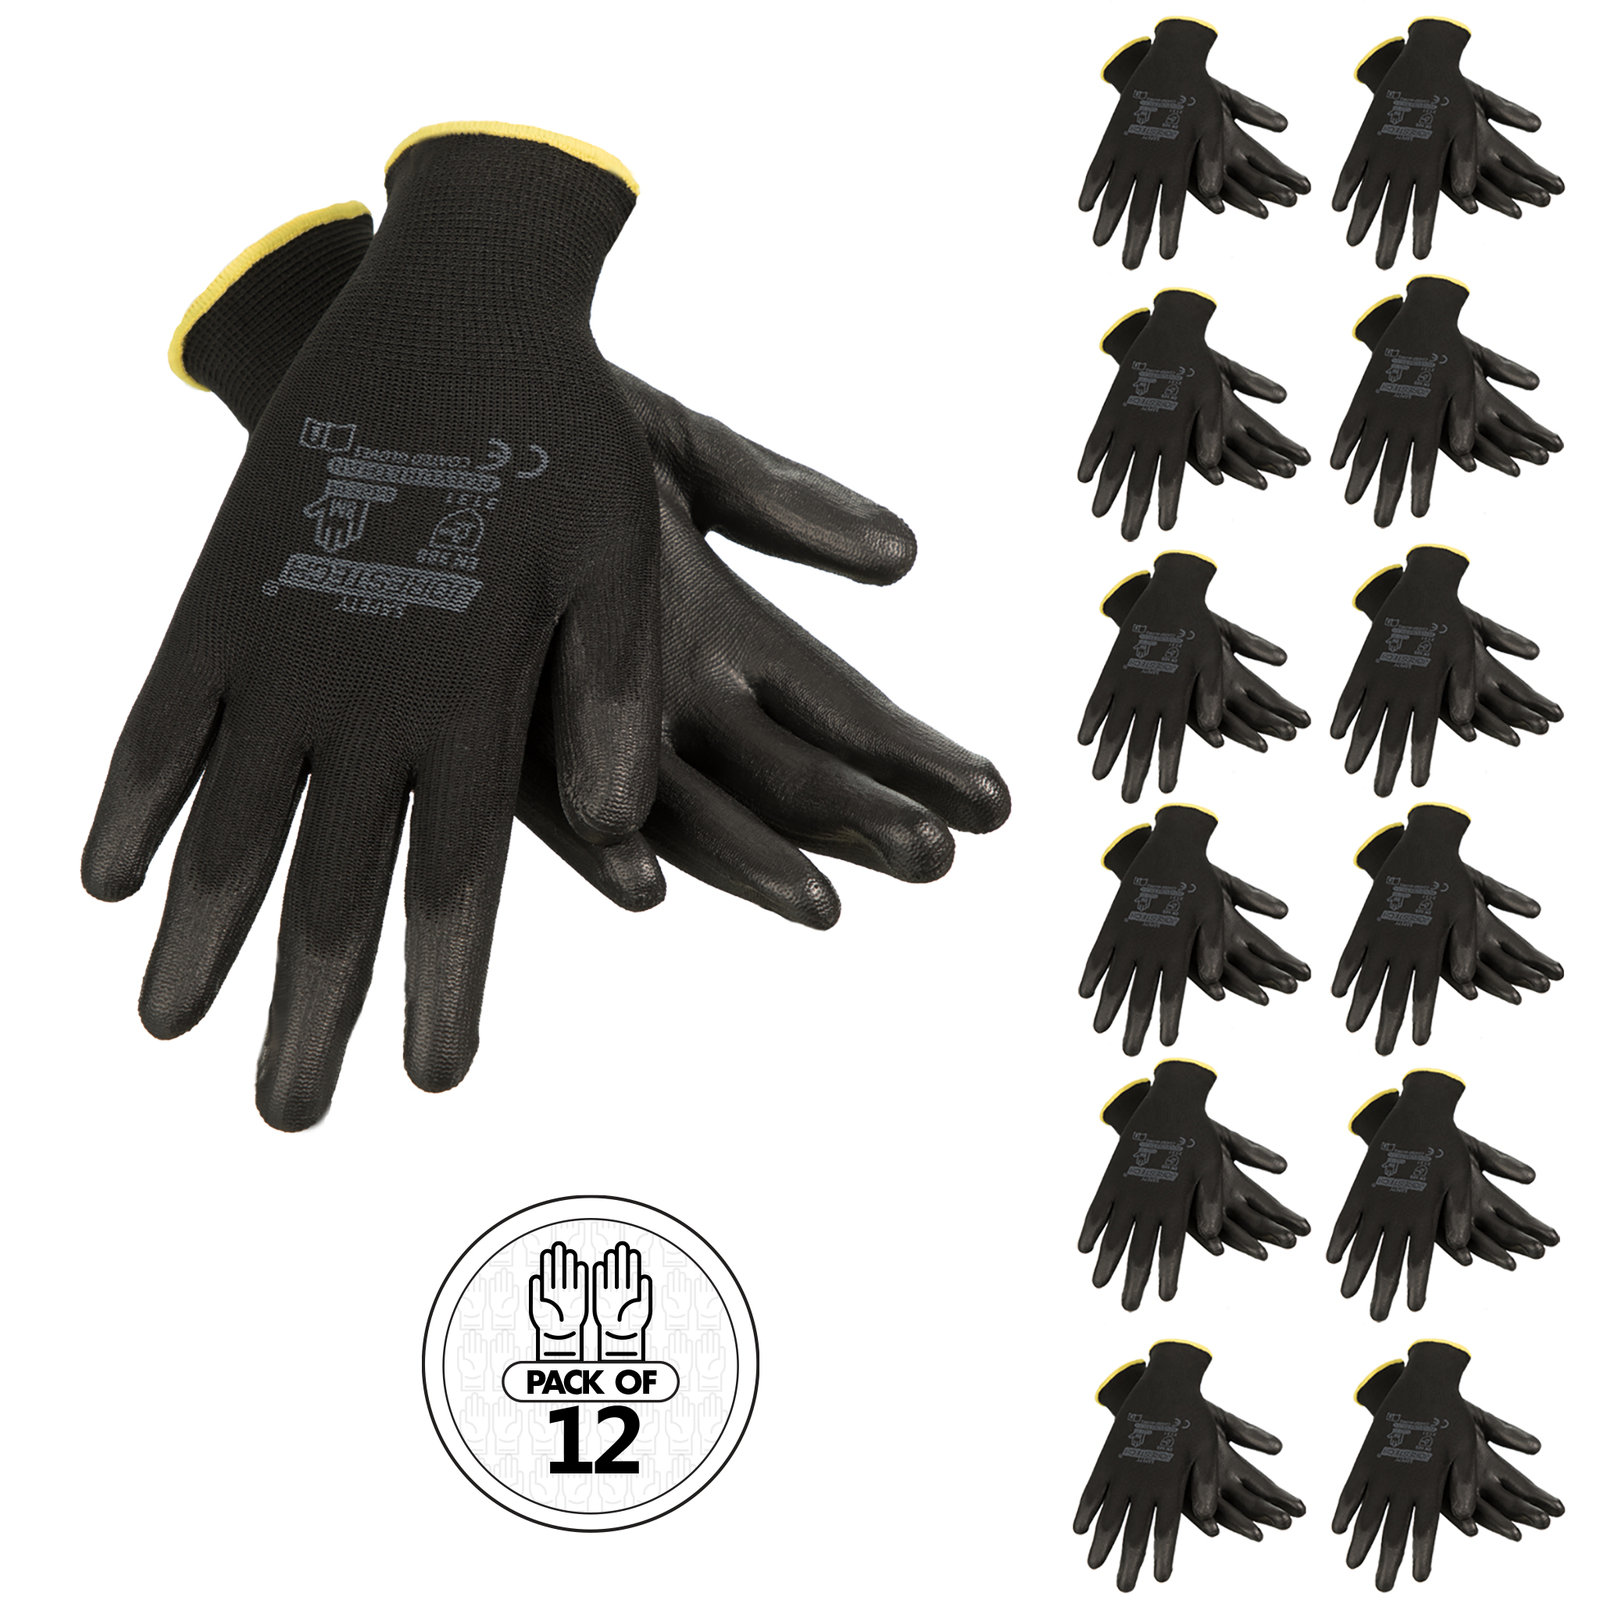 Pack of 12 pairs of thin safety work gloves with polyurethane dipped palm